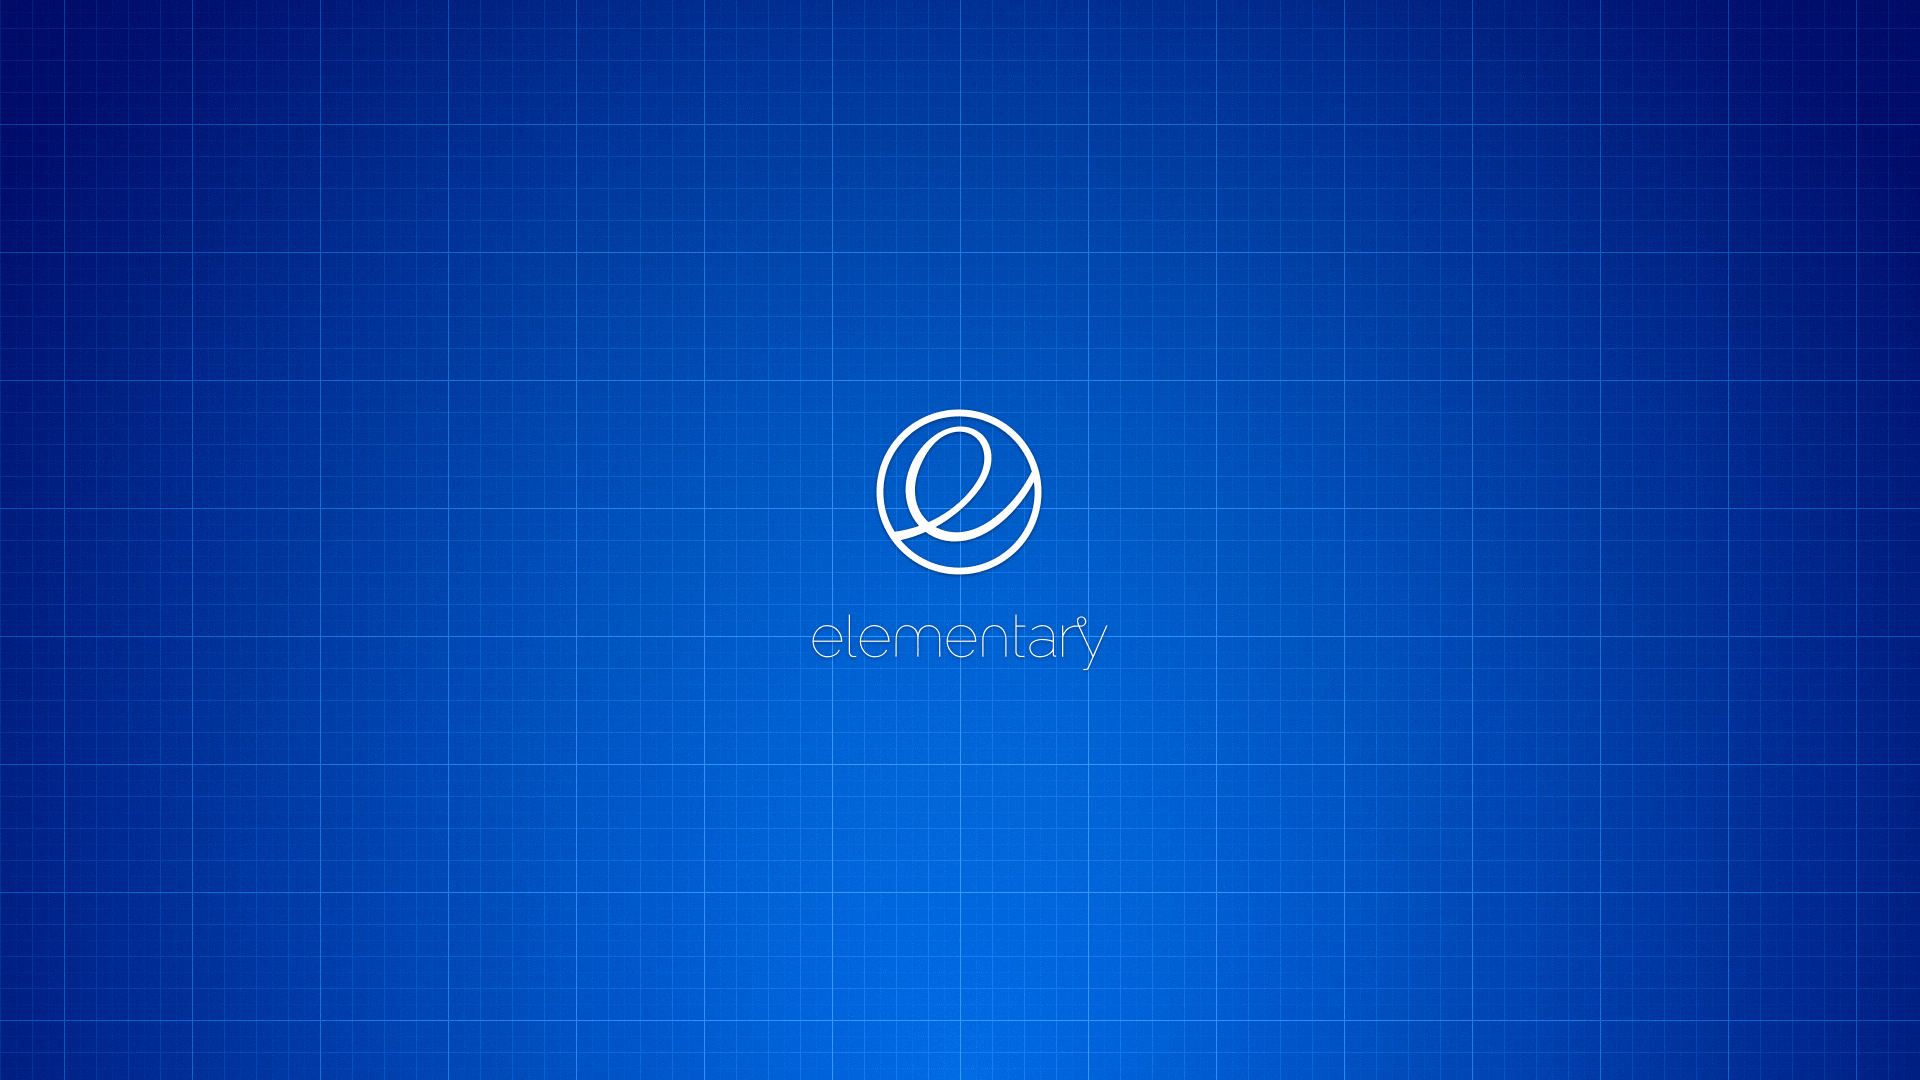 Check Out These Beautiful elementary OS Wallpaper